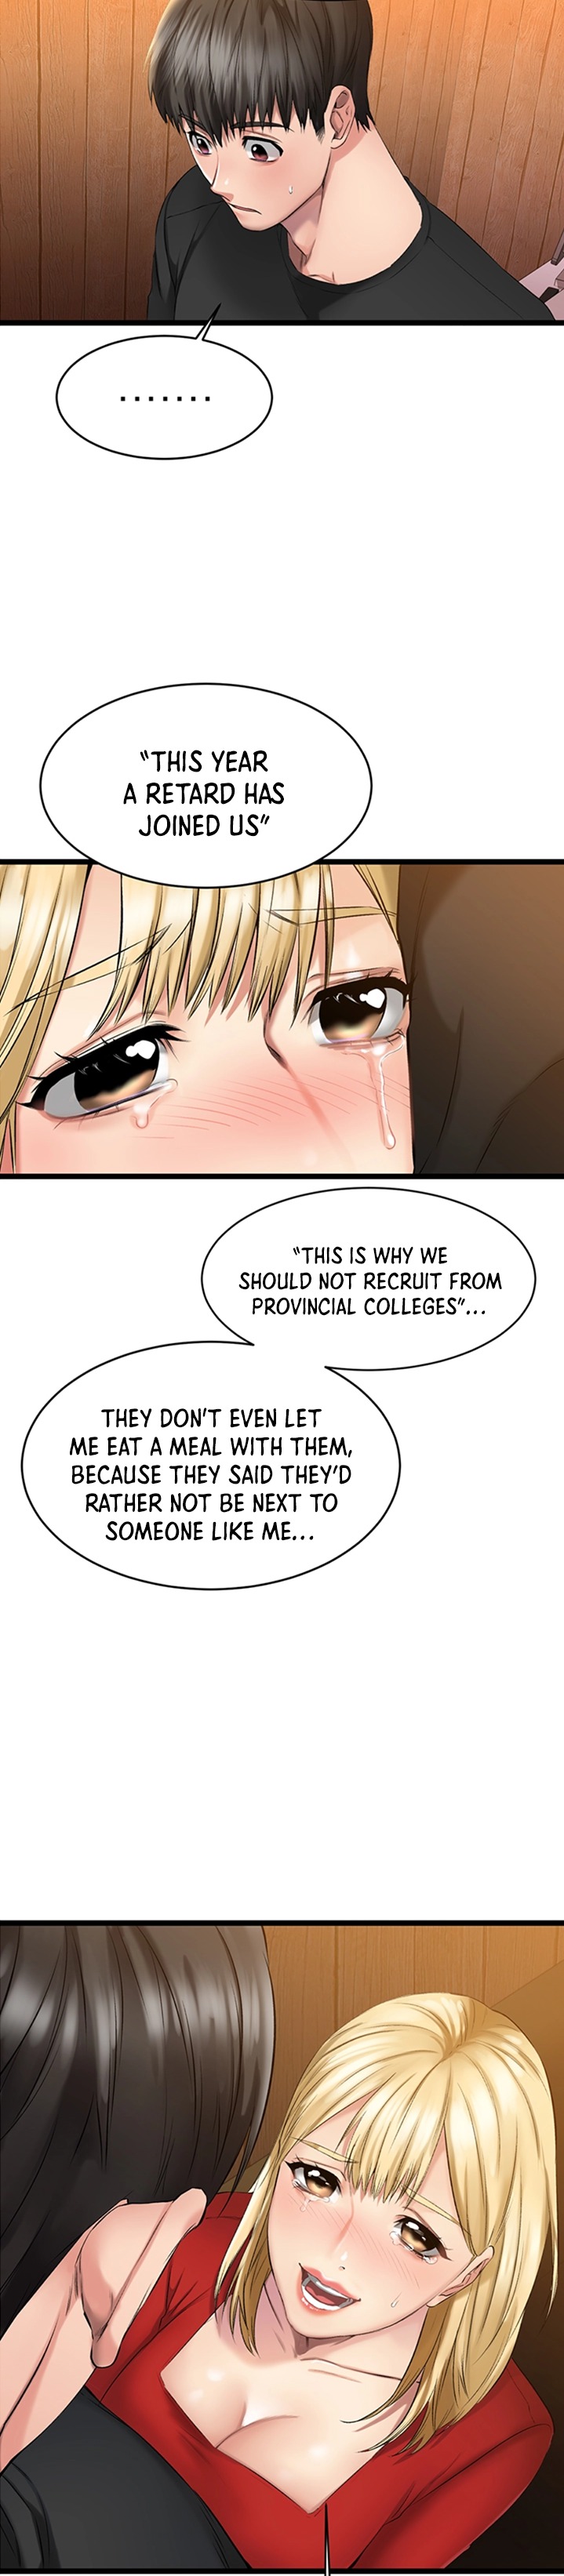 My Female Friend Who Crossed The Line - Chapter 1 Page 71